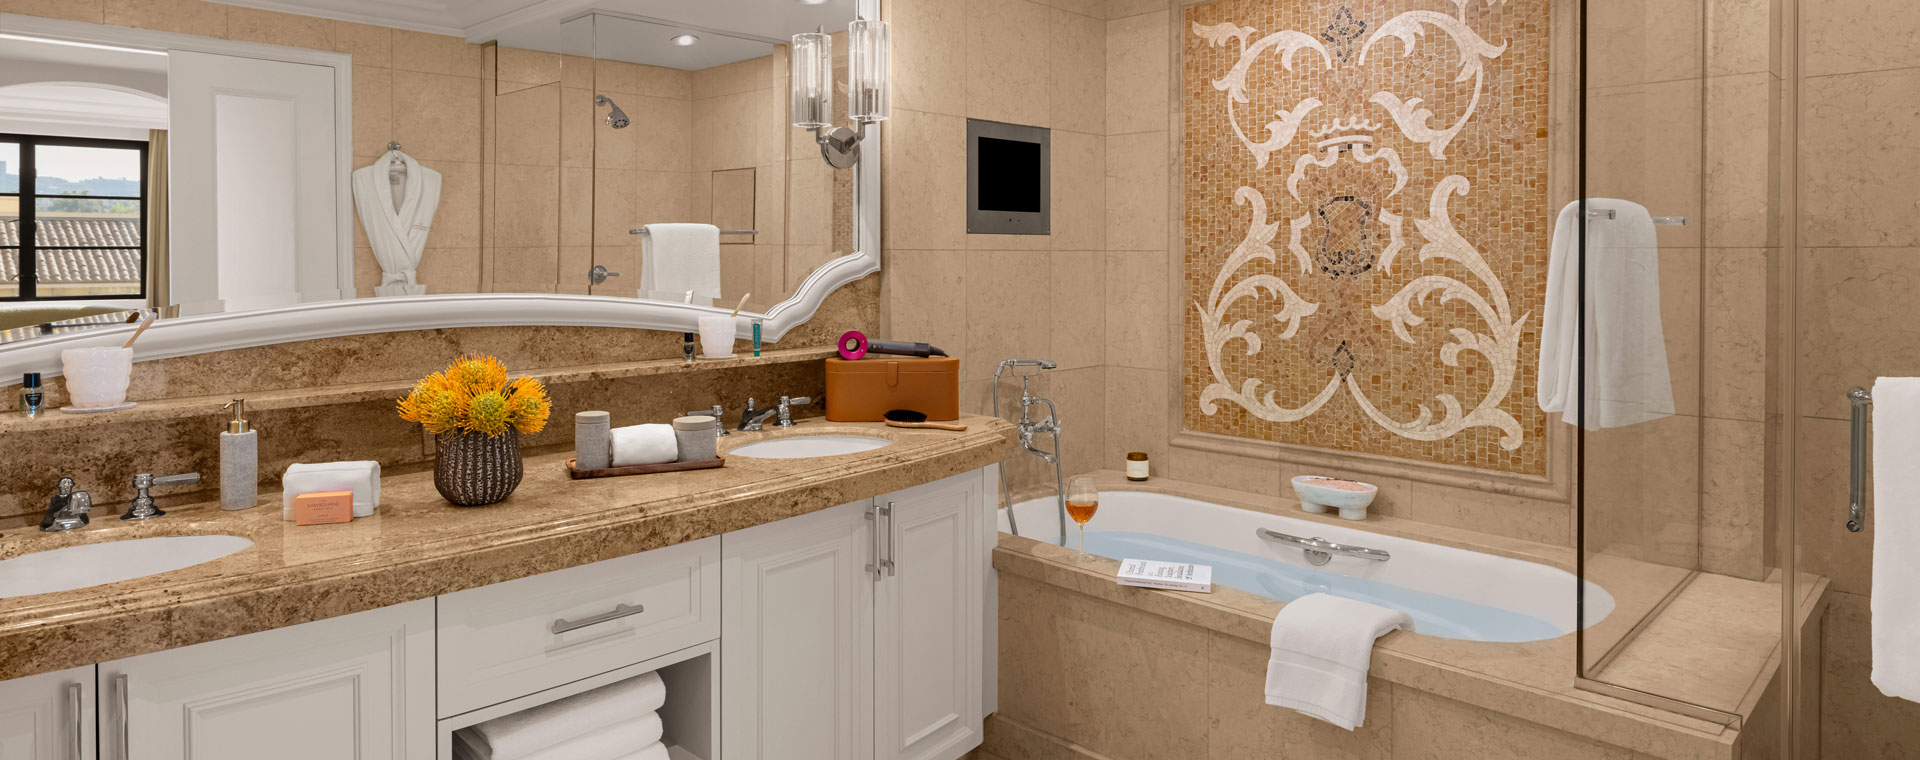 The bathroom of a hotel room with two sinks and a large bathtub. There is a mosaic wall above the bath tub.